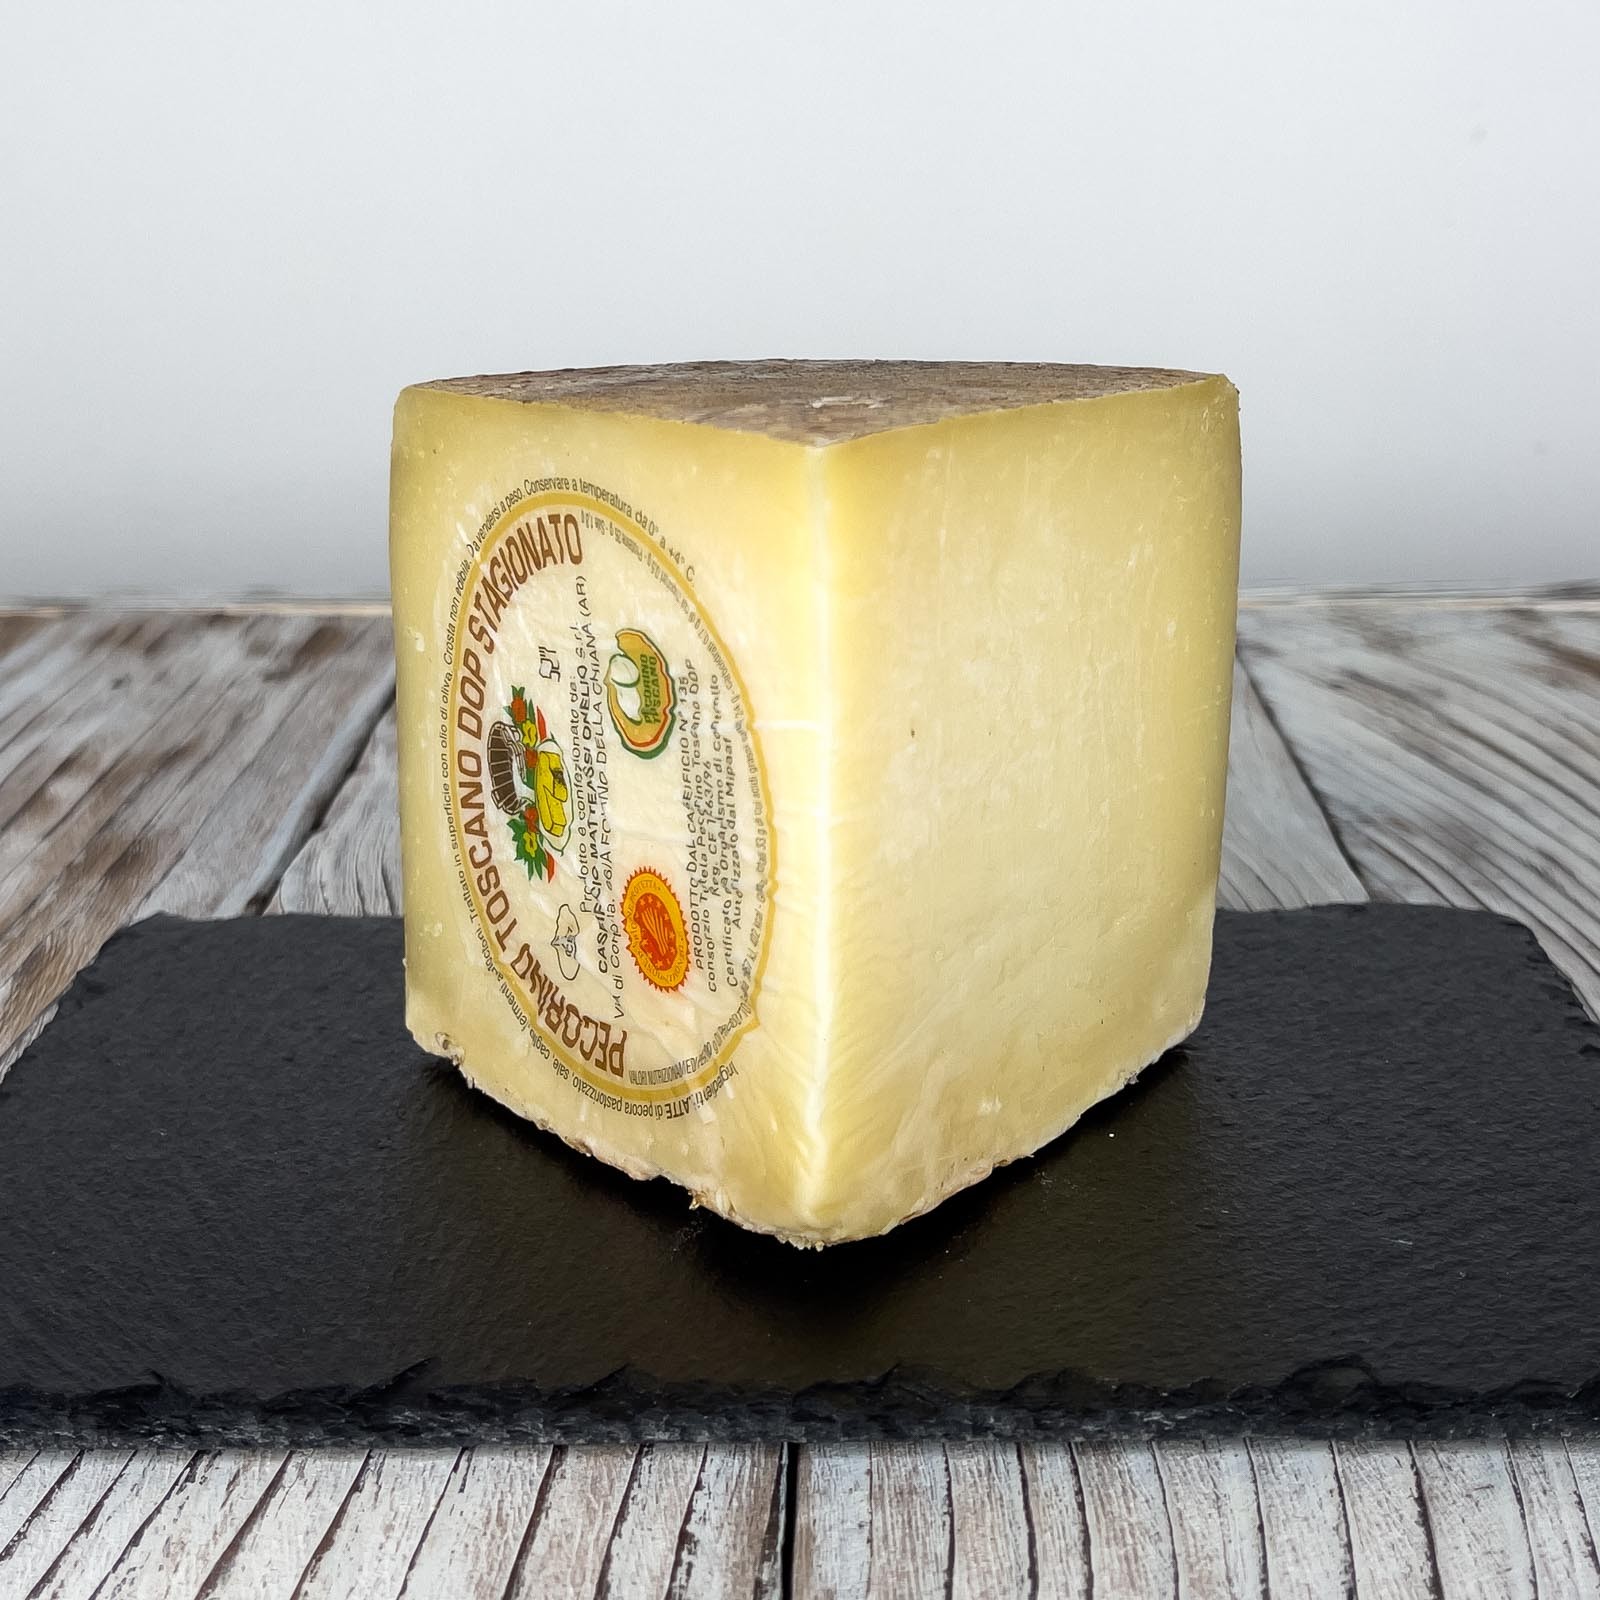 Aged Tuscan Pecorino Cheese PDO is a traditional cheese, characterized by a hard paste obtained from pasteurized sheep's milk, with the addition of rennet and salt. Aged Tuscan Pecorino Cheese PDO has a minimum maturation of 120 days and is suitable for enriching traditional Italian dishes.